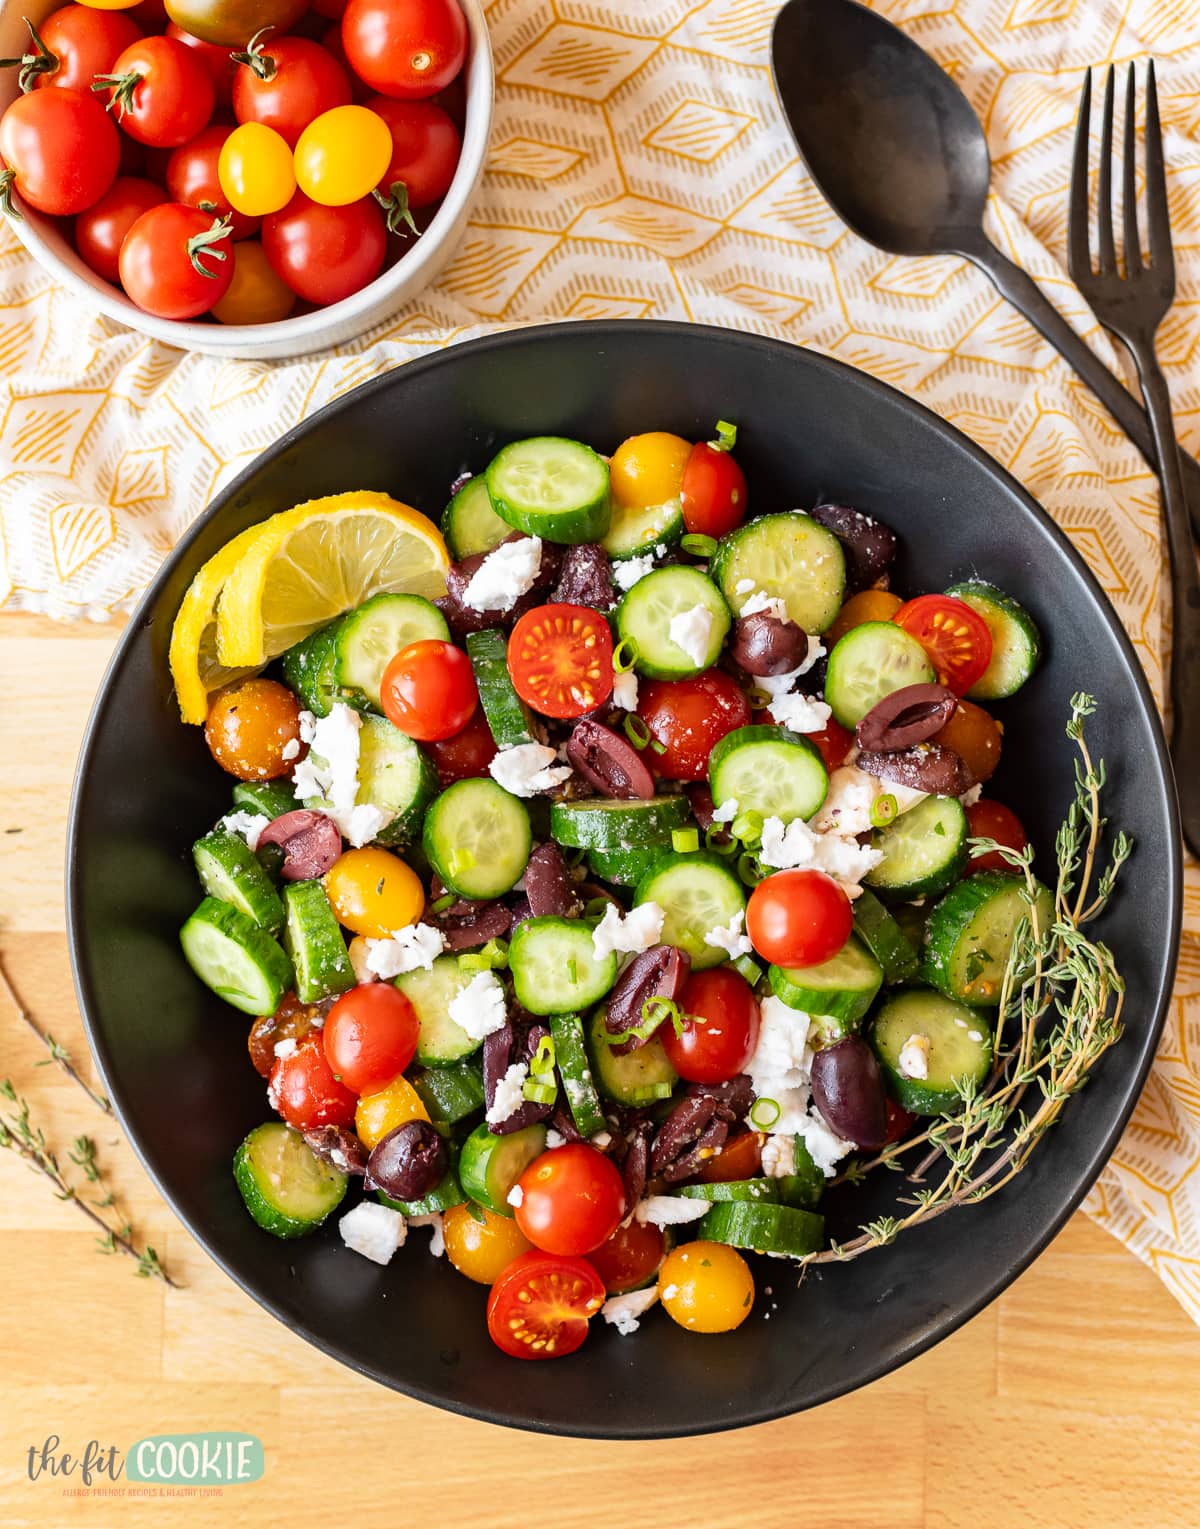 Greek salad with cucumbers, tomatoes and feta cheese served in a black bowl.